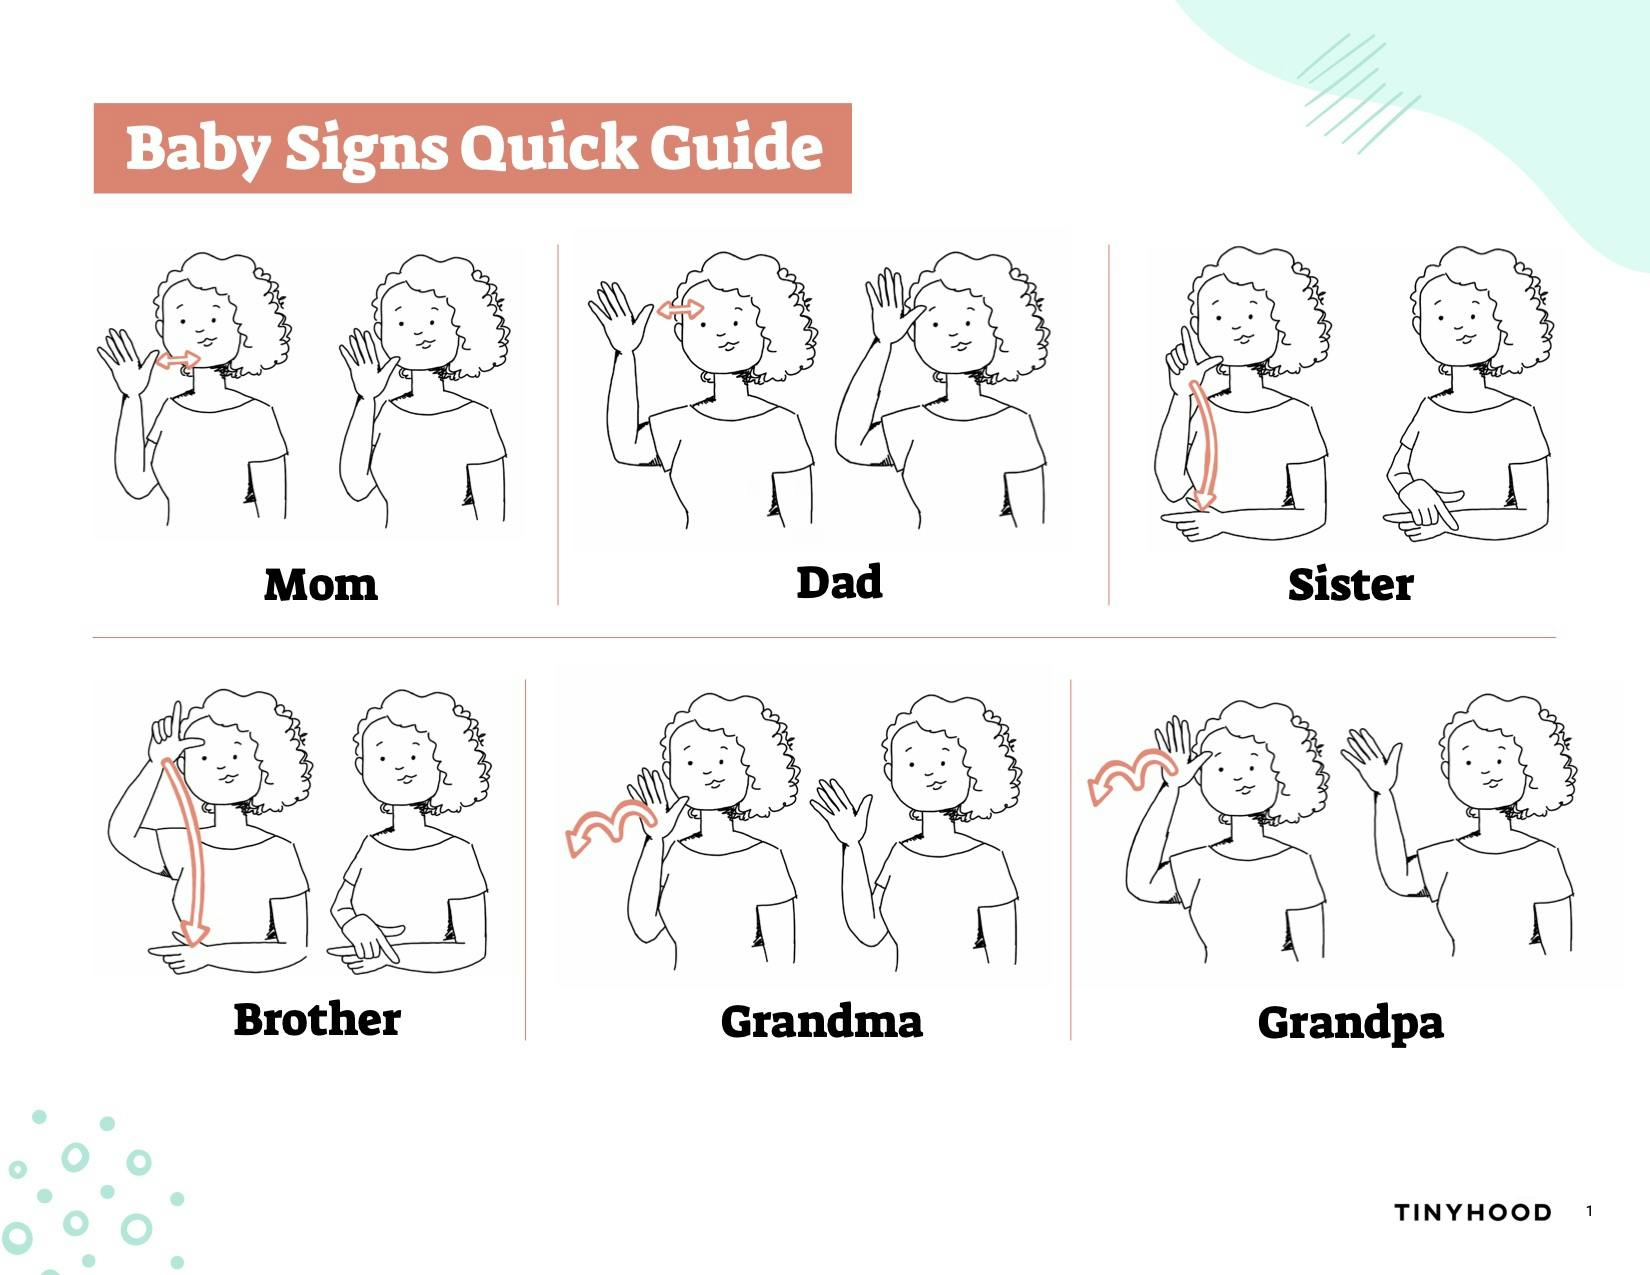 Preview image of Handout: Baby Signs Quick Guide